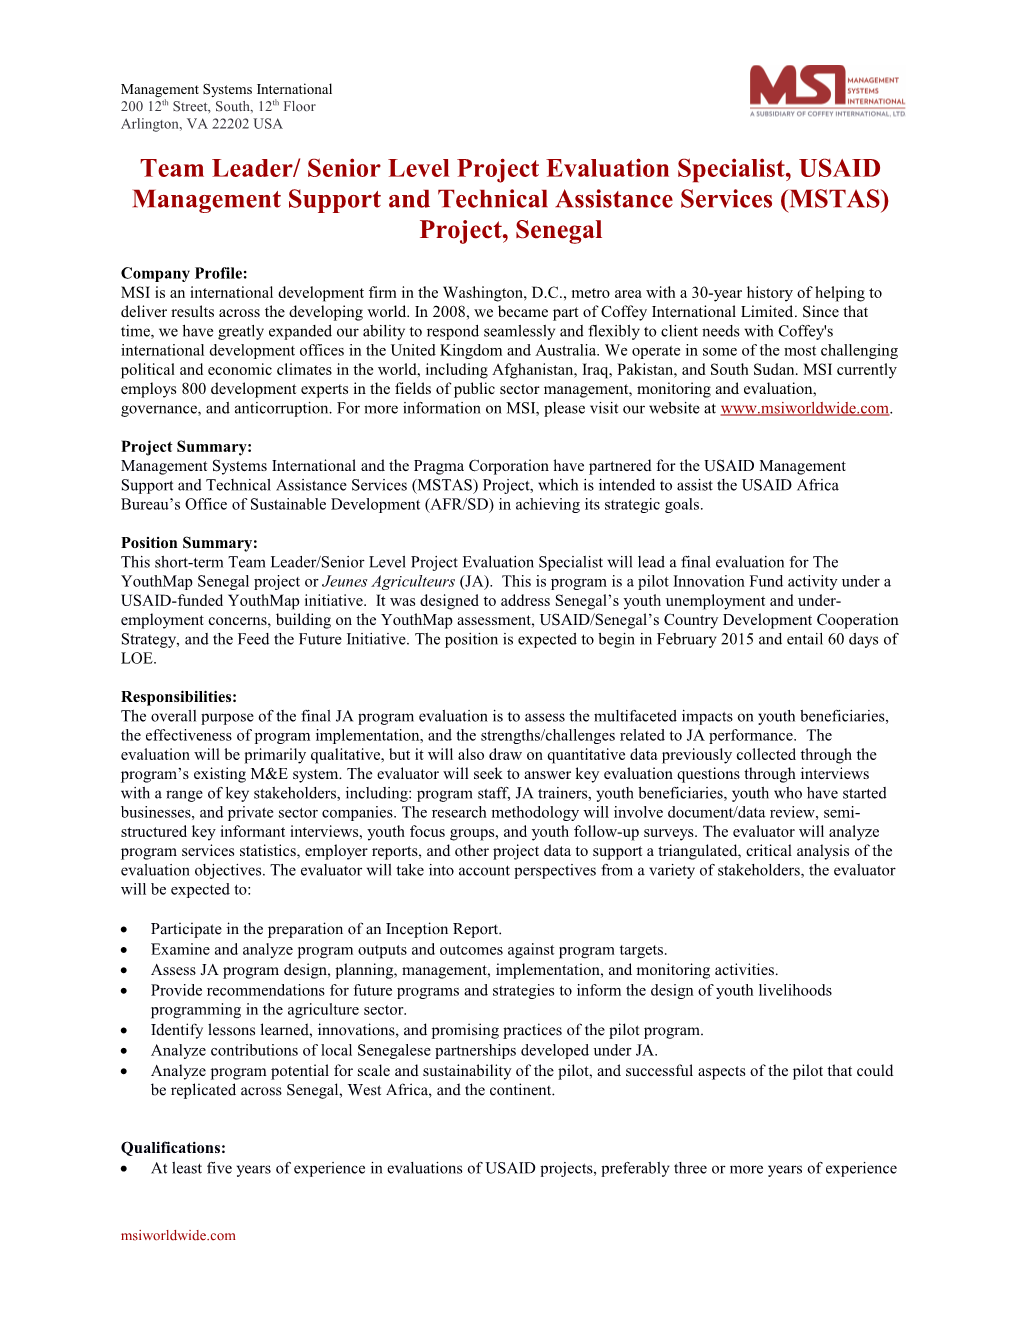 Team Leader/ Senior Level Project Evaluation Specialist, USAID Management Support And